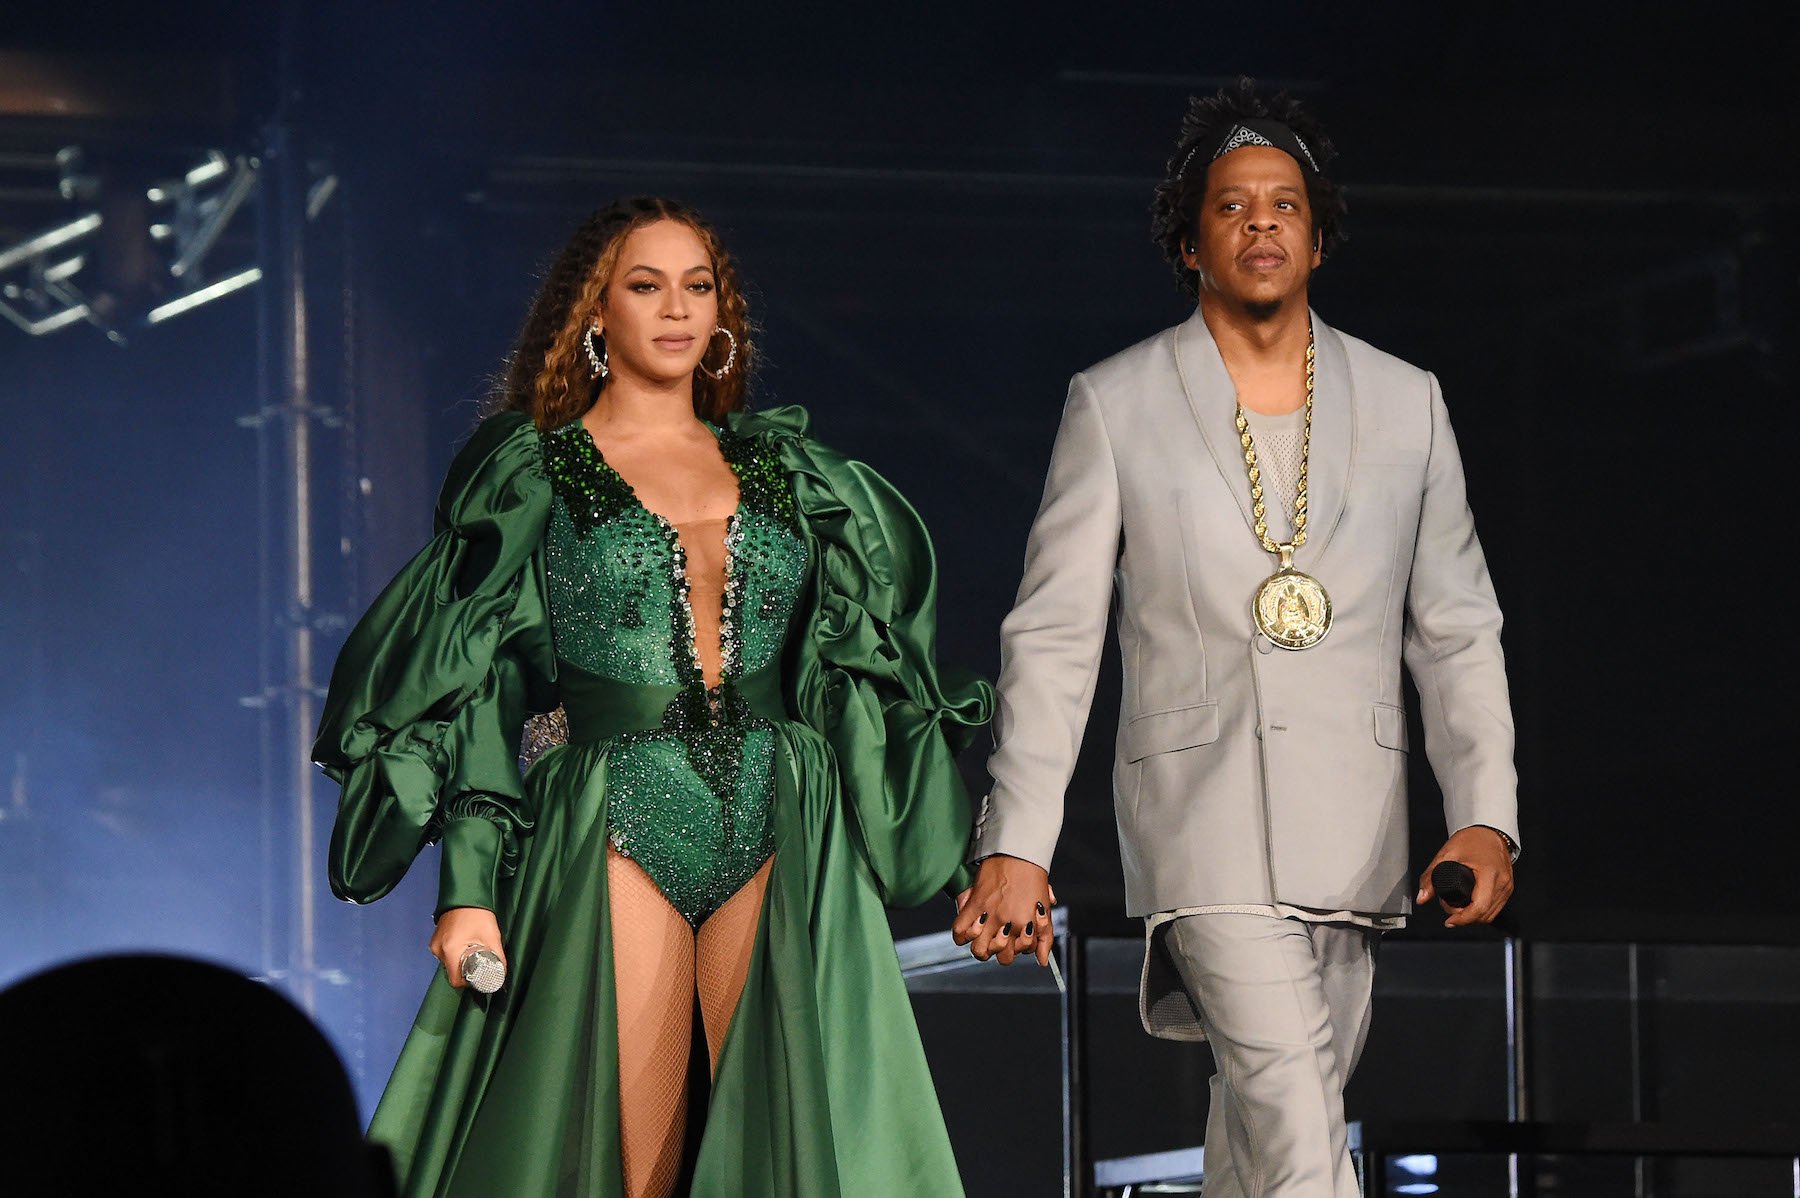 Beyoncé and JayZ Are Tied For the Most Nominations in Grammys History